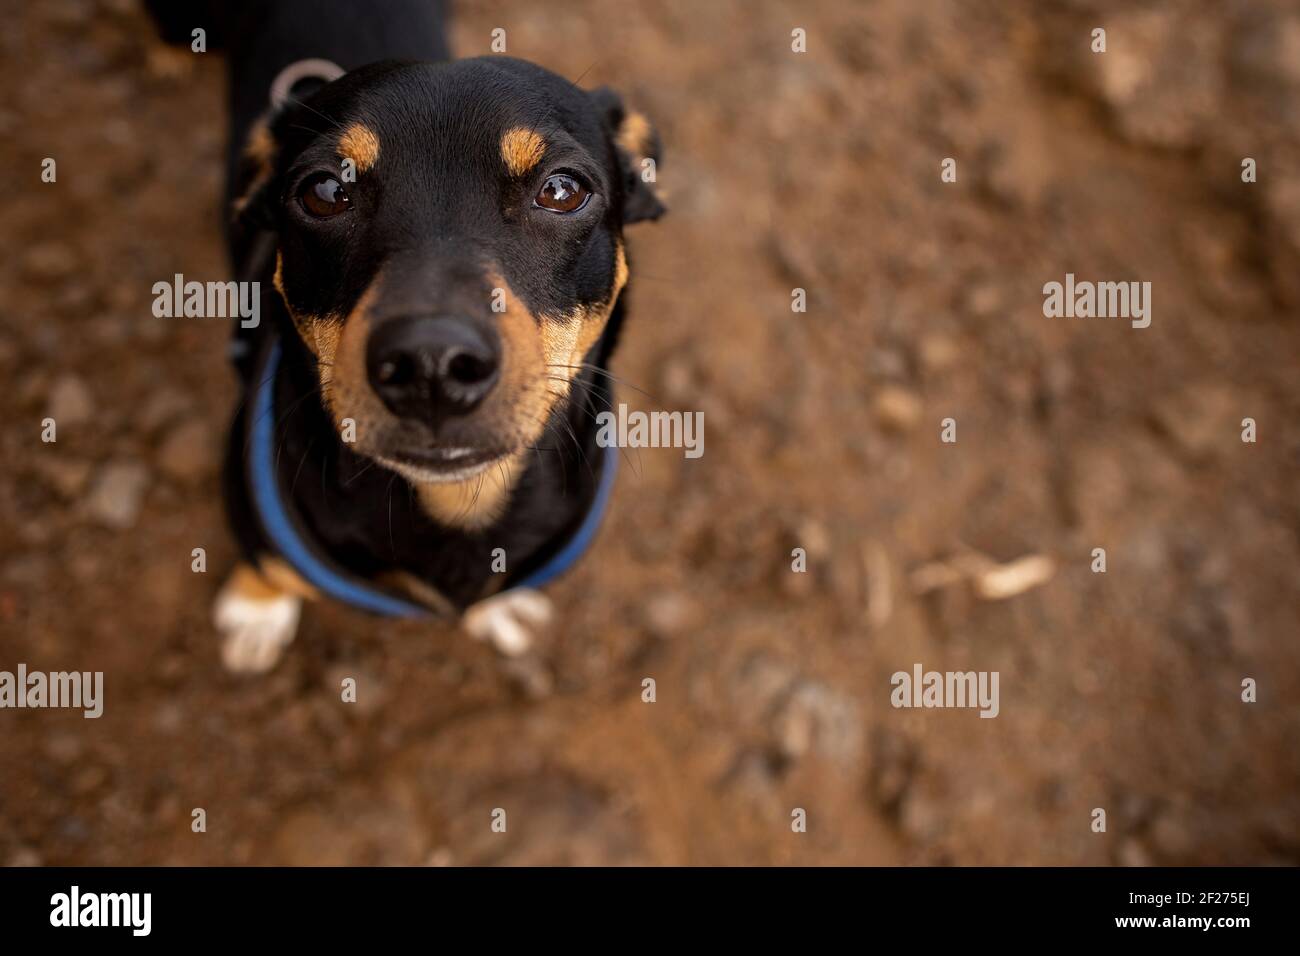 black and brown dog stands in dirt and stares at camera Stock Photo